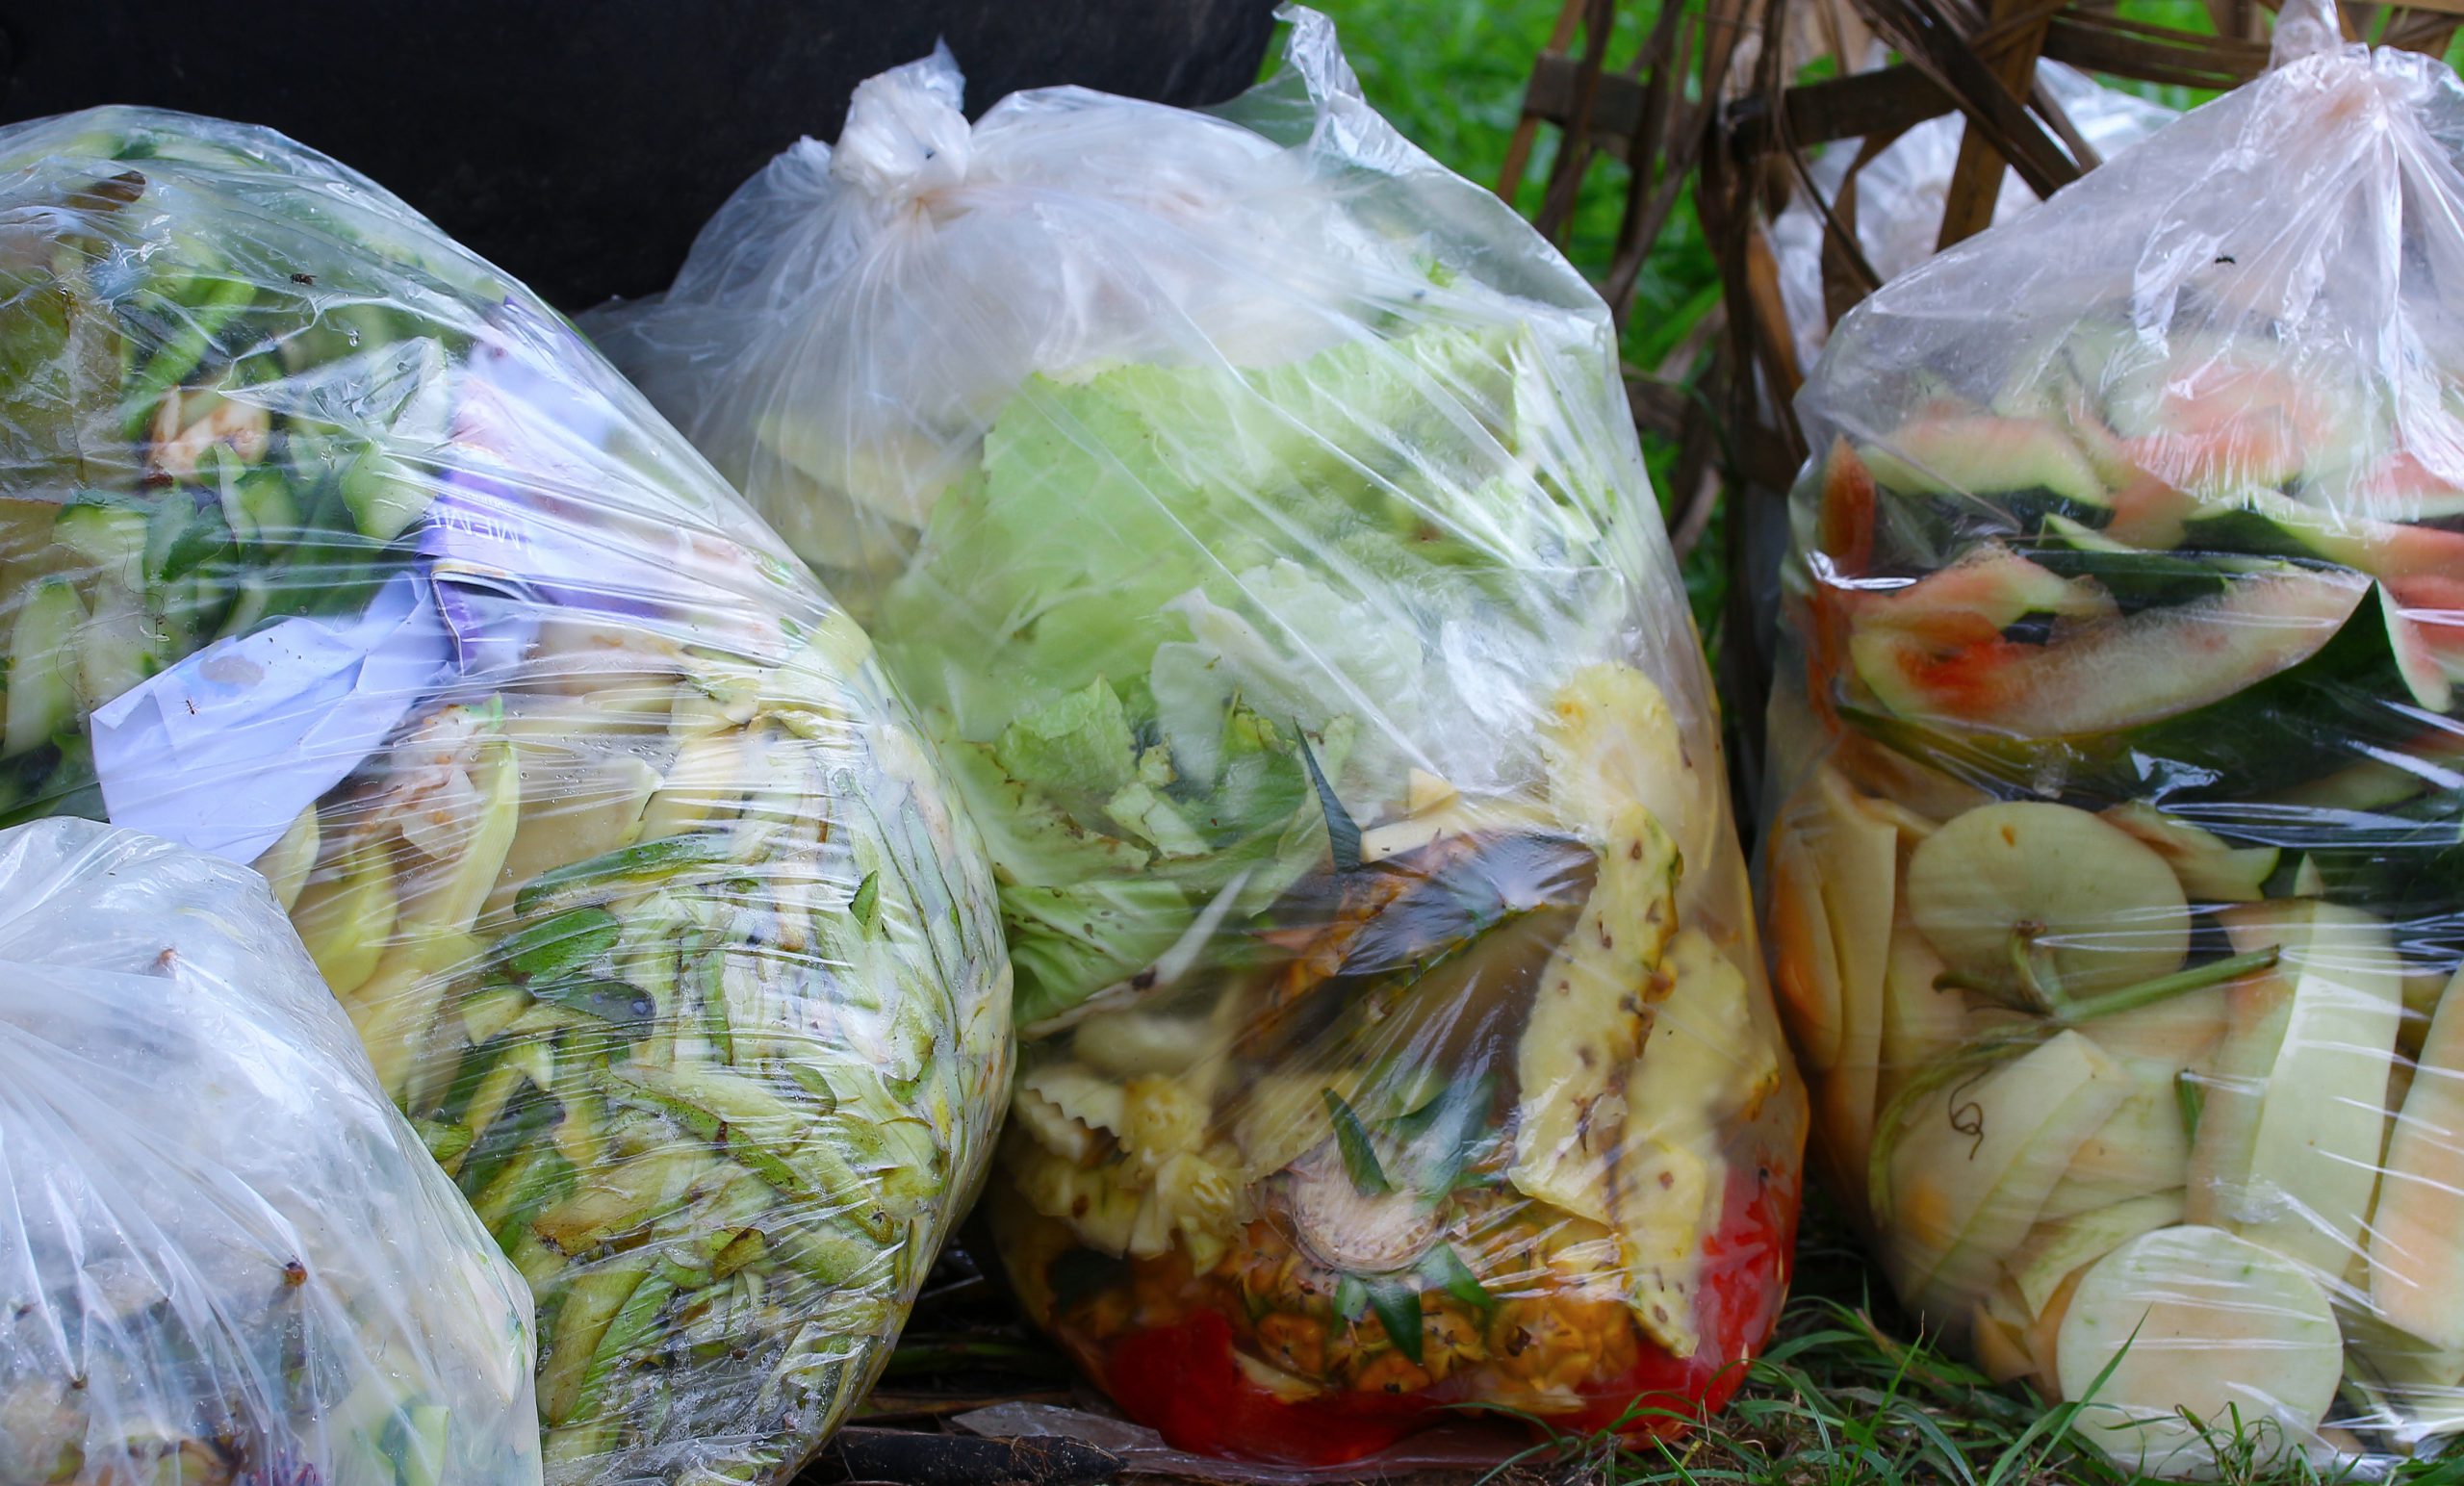 How Plastic Packaging Reduces the Wastage of Food